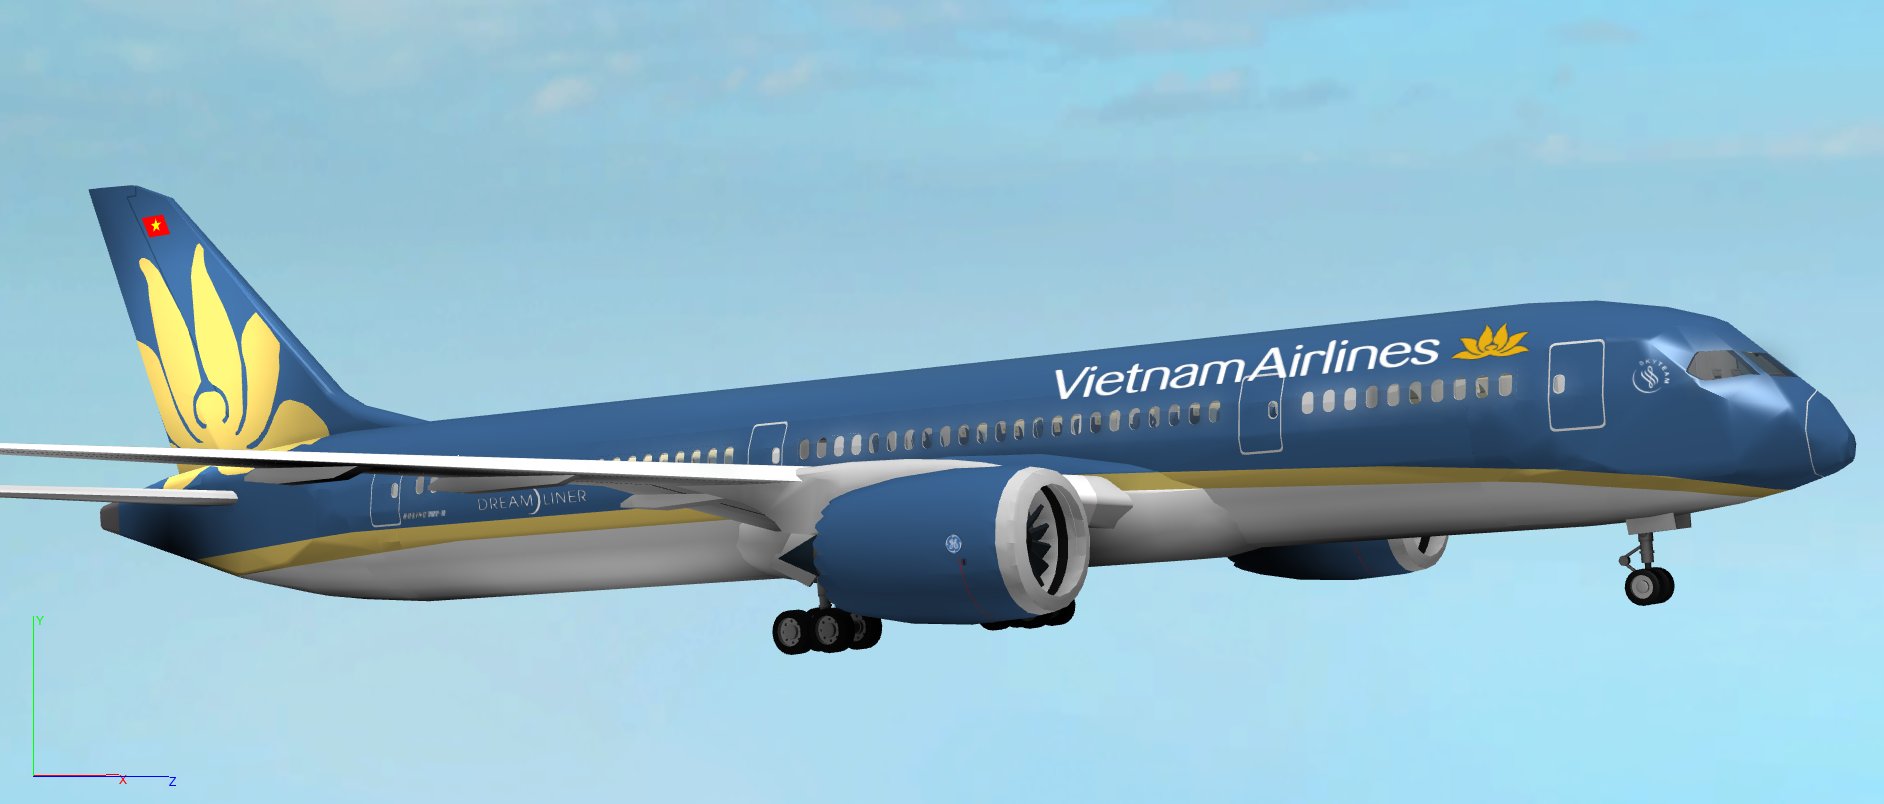 Roblox Vietnam Airlines On Twitter The 787 Is Now Completed Guess You Ll Just Have To Come To A Flight One Day To Experience It All For Yourself Roblox Robloxdev Cuddlesag Rblx 6 Business - roblox singapore airlines on twitter we will be at